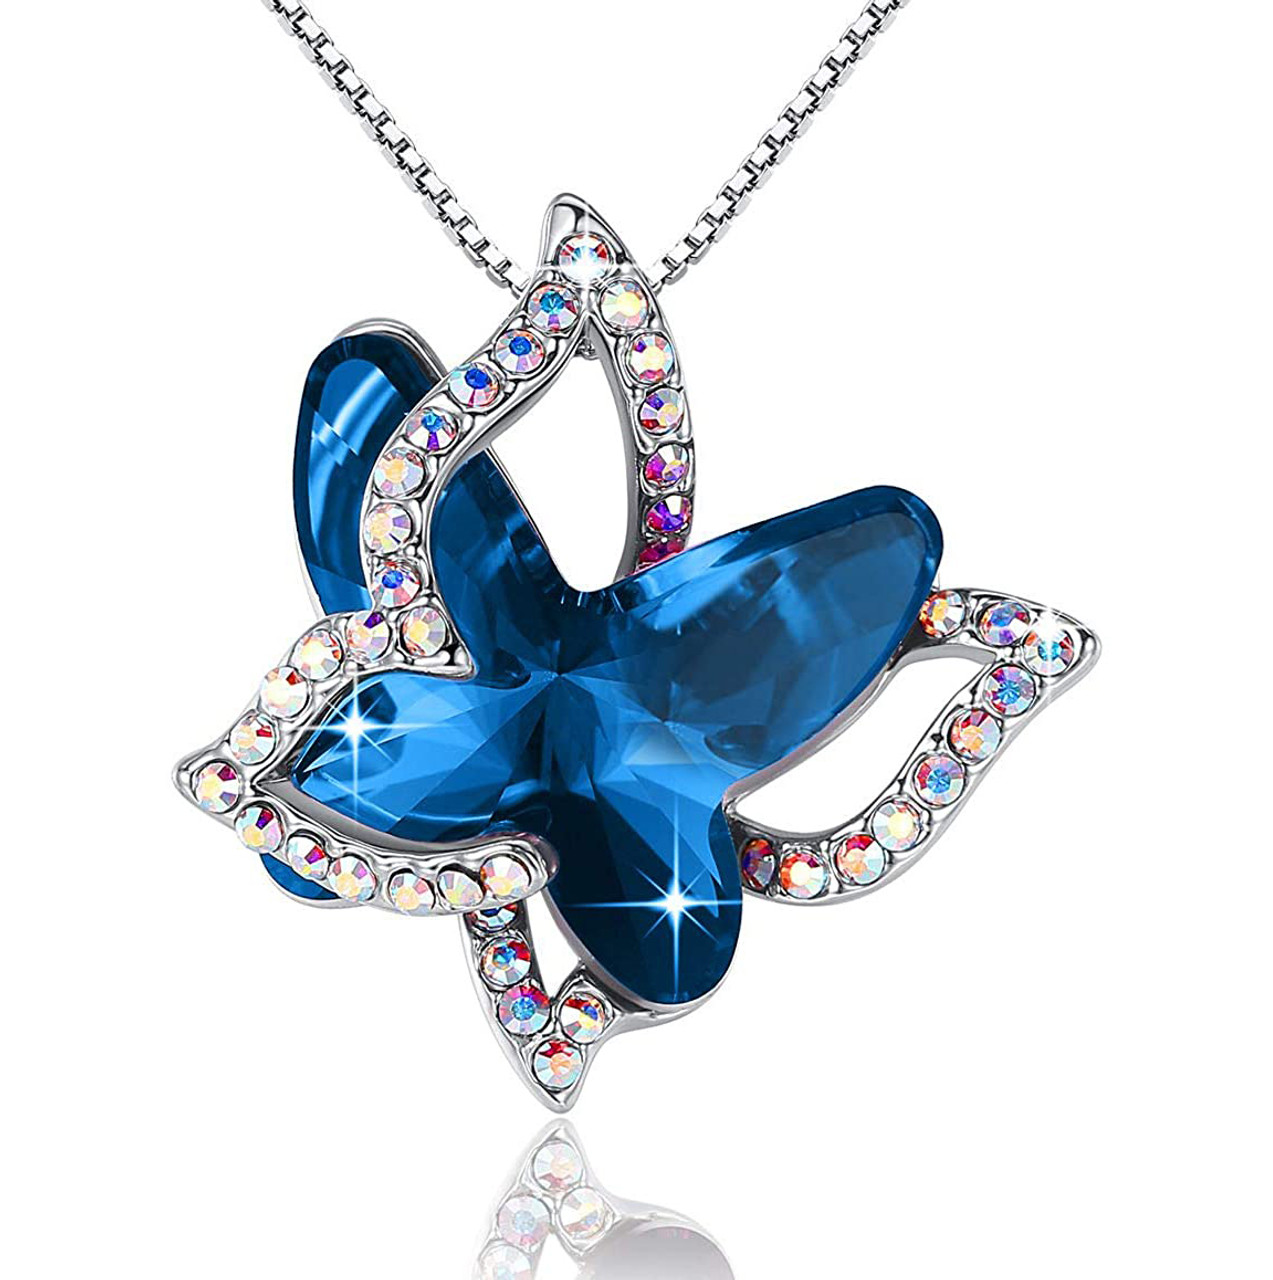 September Birthstone - Dark Blue Sapphire Double Butterflies Design Crystal Pendant and CZ stones - with 18" Chain Necklace. Gift for Lover, Girl Friend, Wife, Valentine's Day Gift, Mother's Day, Anniversary Gift Butterfly Necklace.